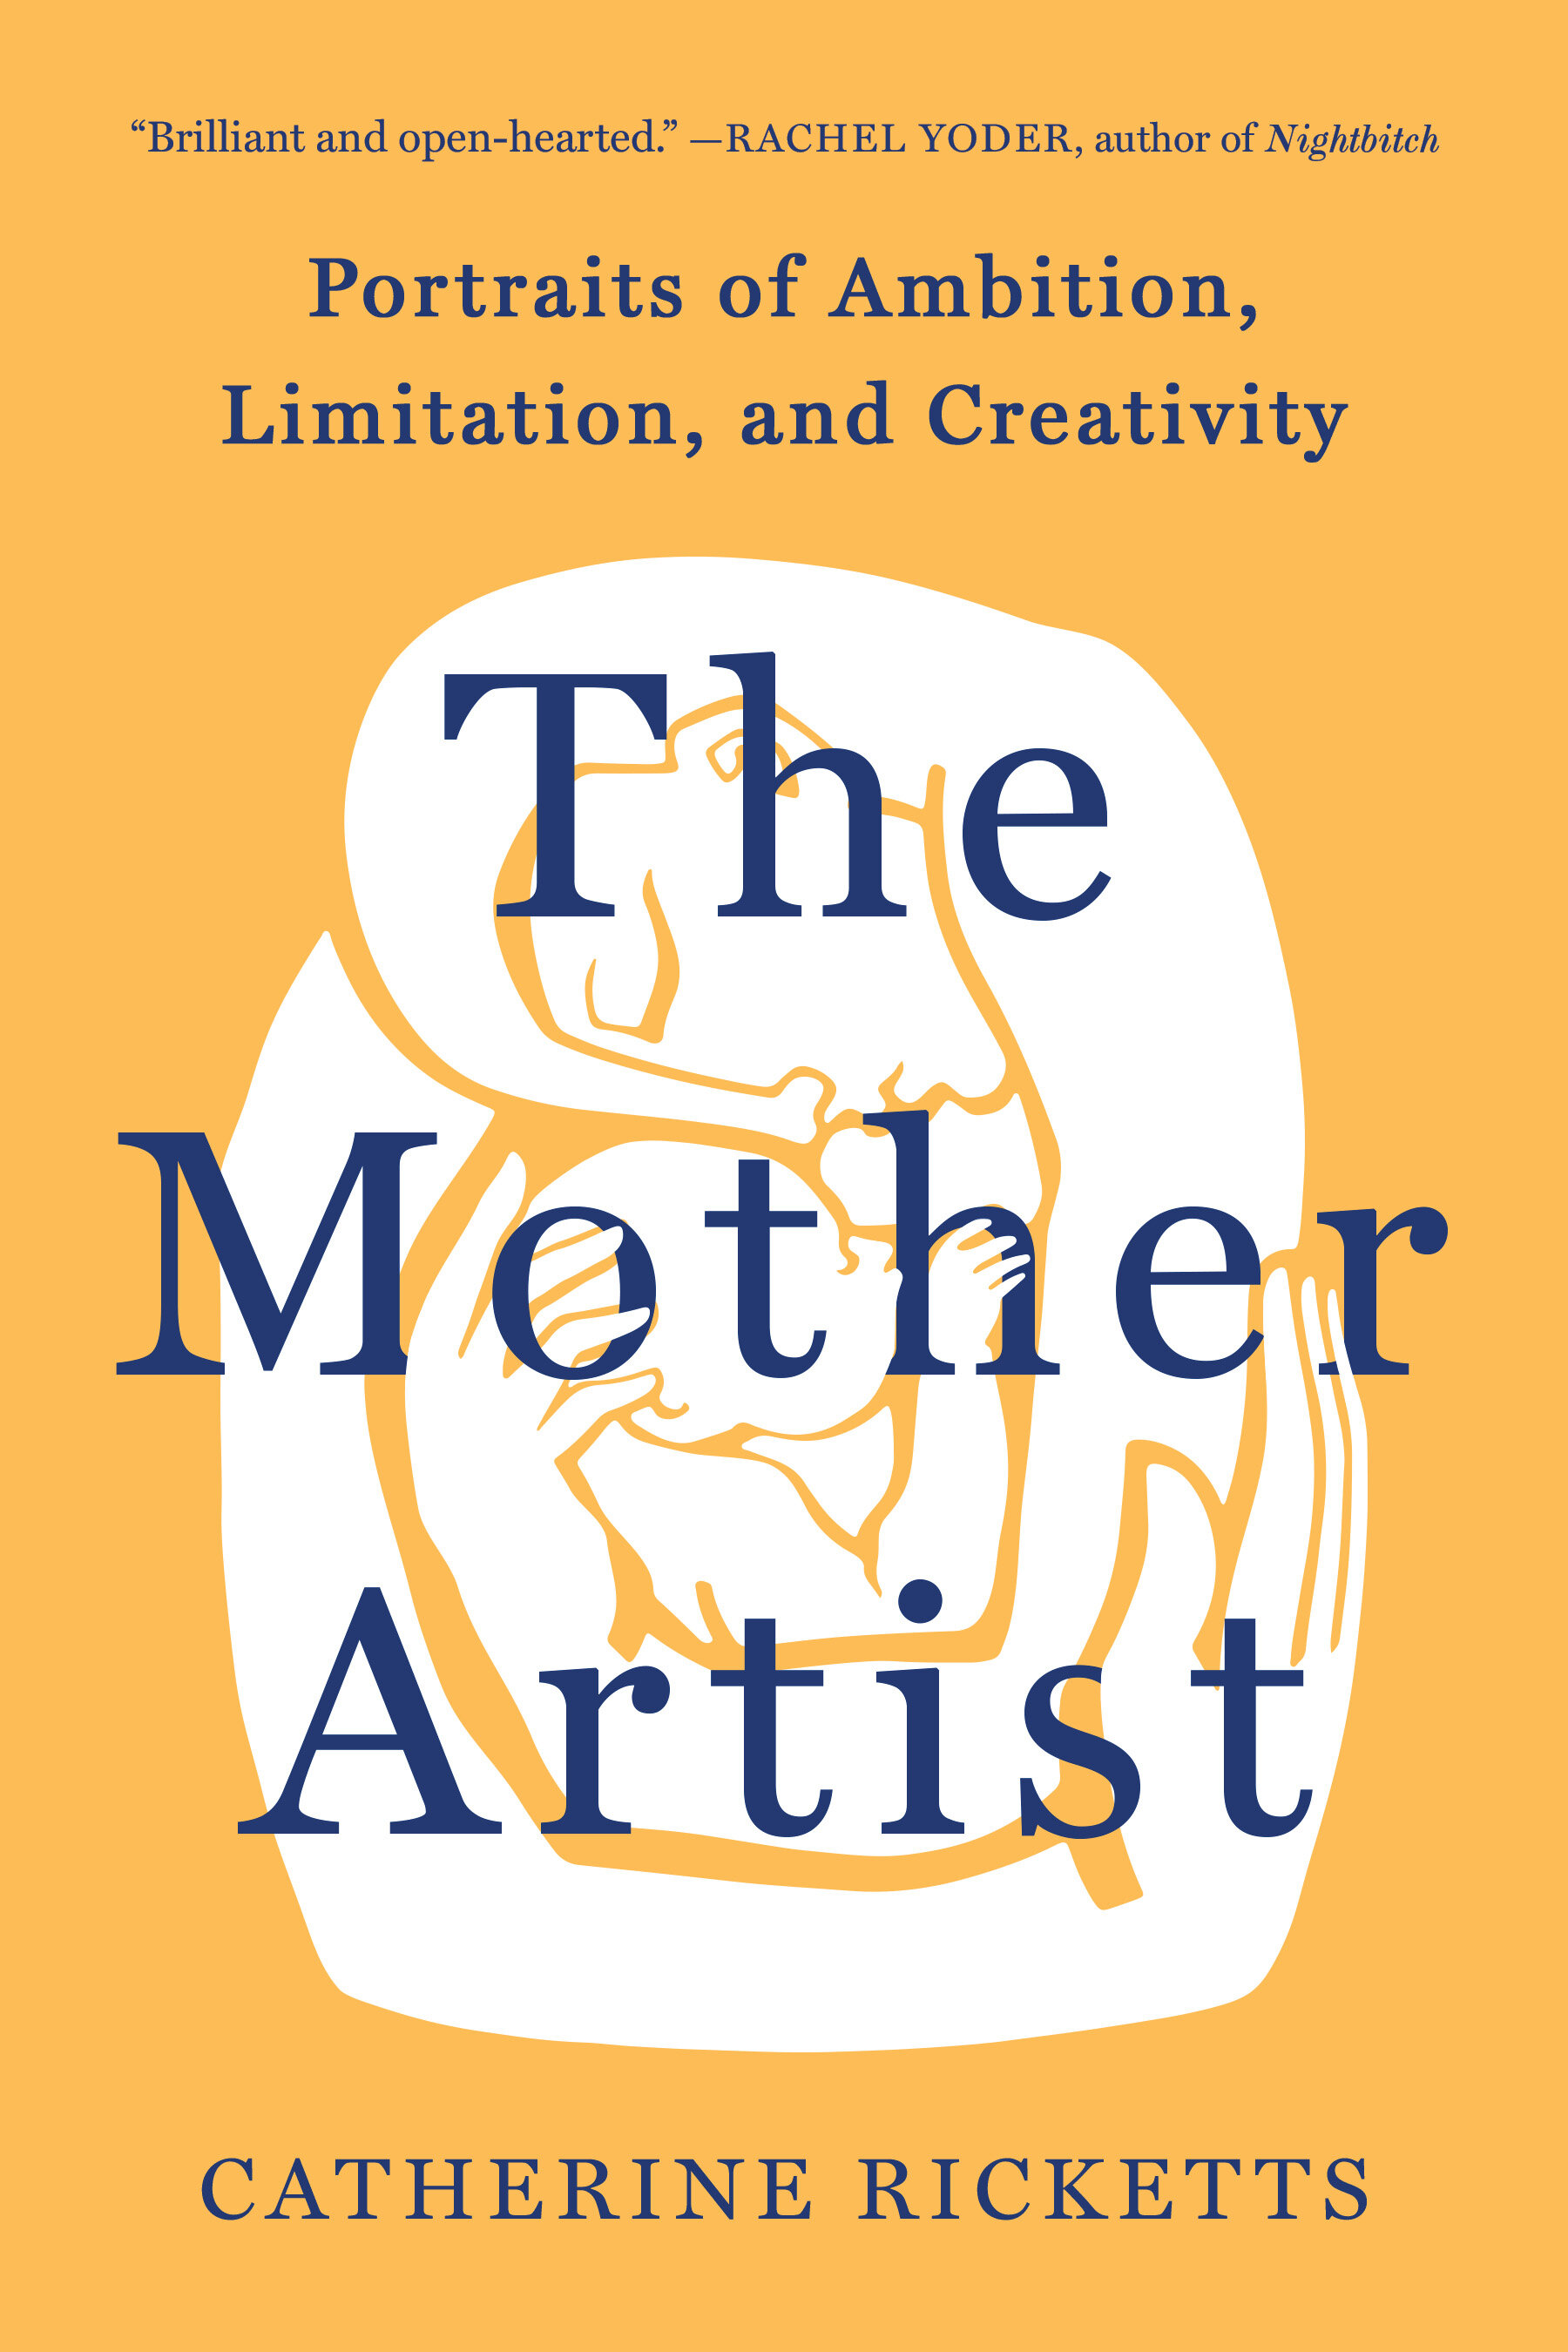 "Mother Artist" book cover